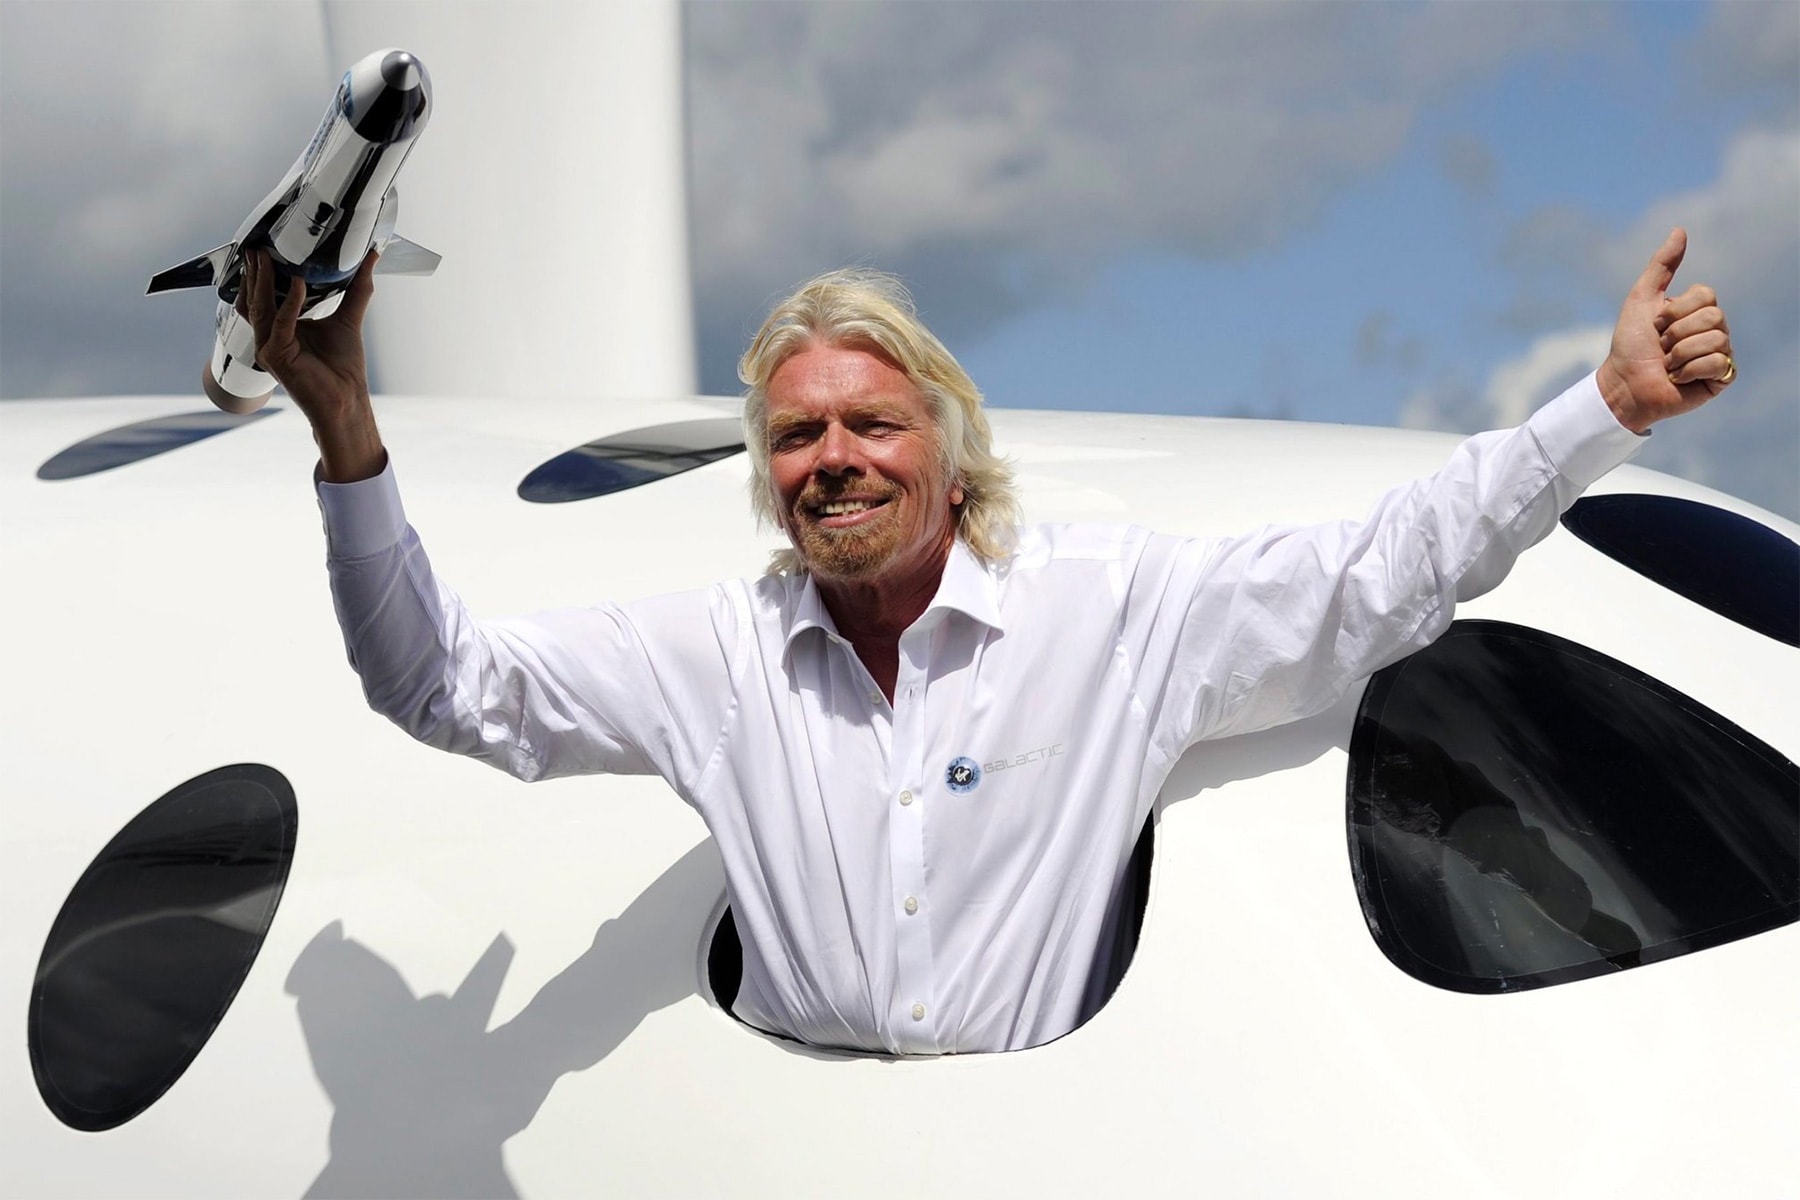 https://image-cdn.hypb.st/https%3A%2F%2Fhypebeast.com%2Fimage%2F2018%2F05%2Frichard-branson-virgin-galactic-to-travel-to-space-in-months-1.jpg?cbr=1&q=90